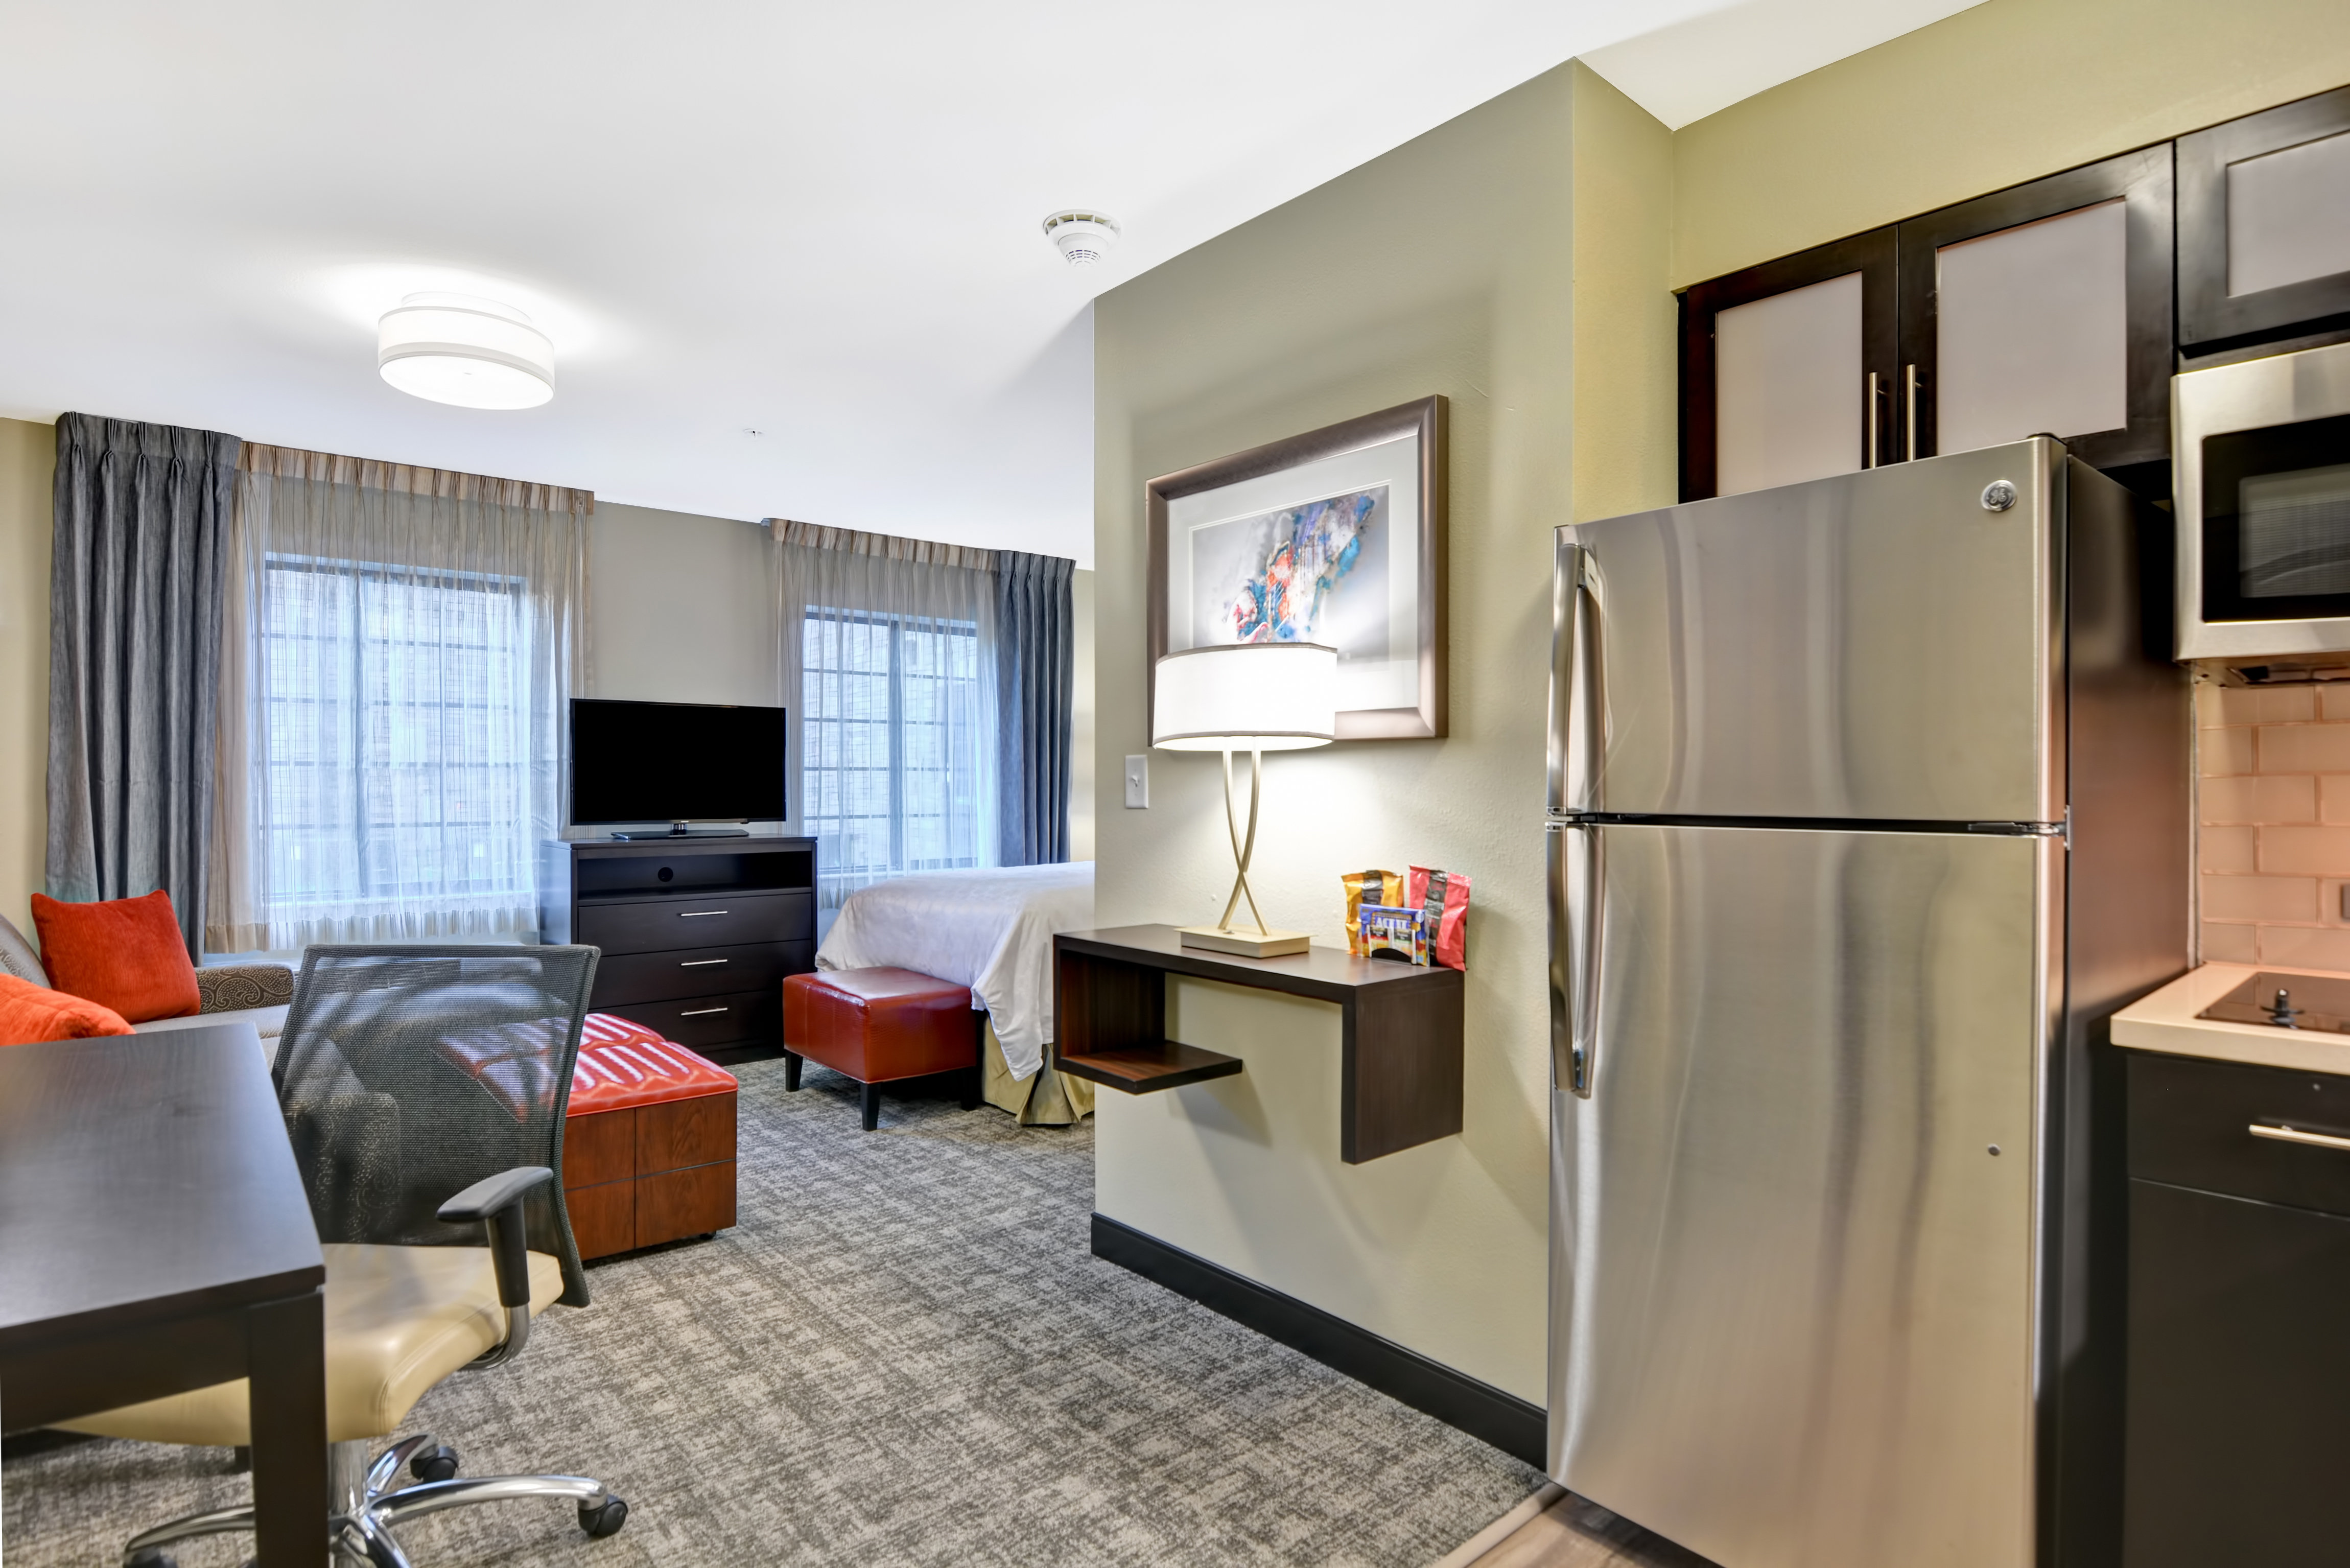 Our guest Suites feature a kitchen with full sized refrigerator.